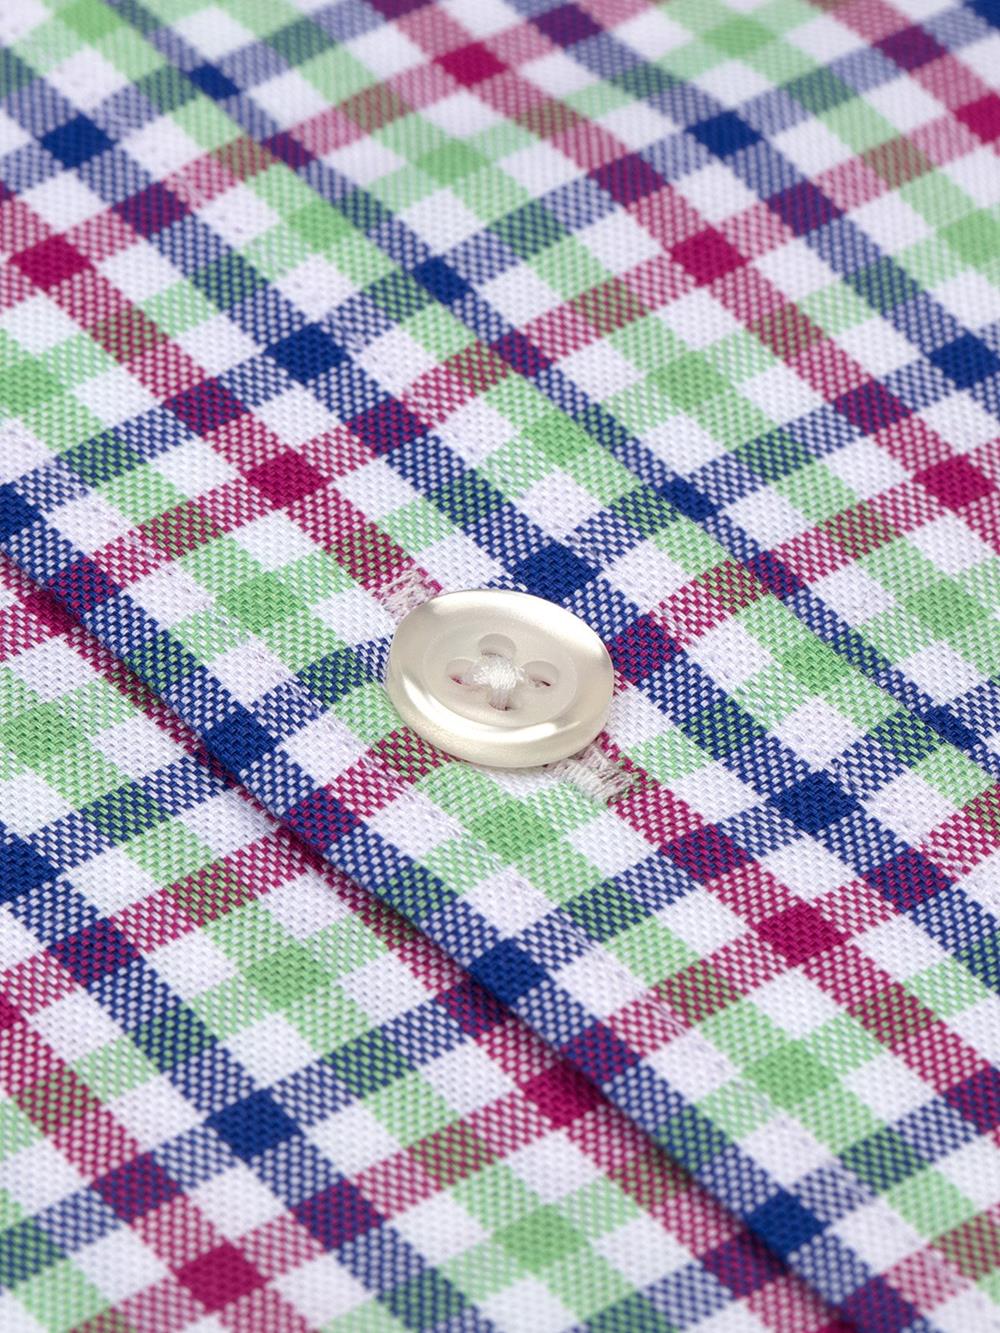 White checked blue and green oxford shirt - Button down collar